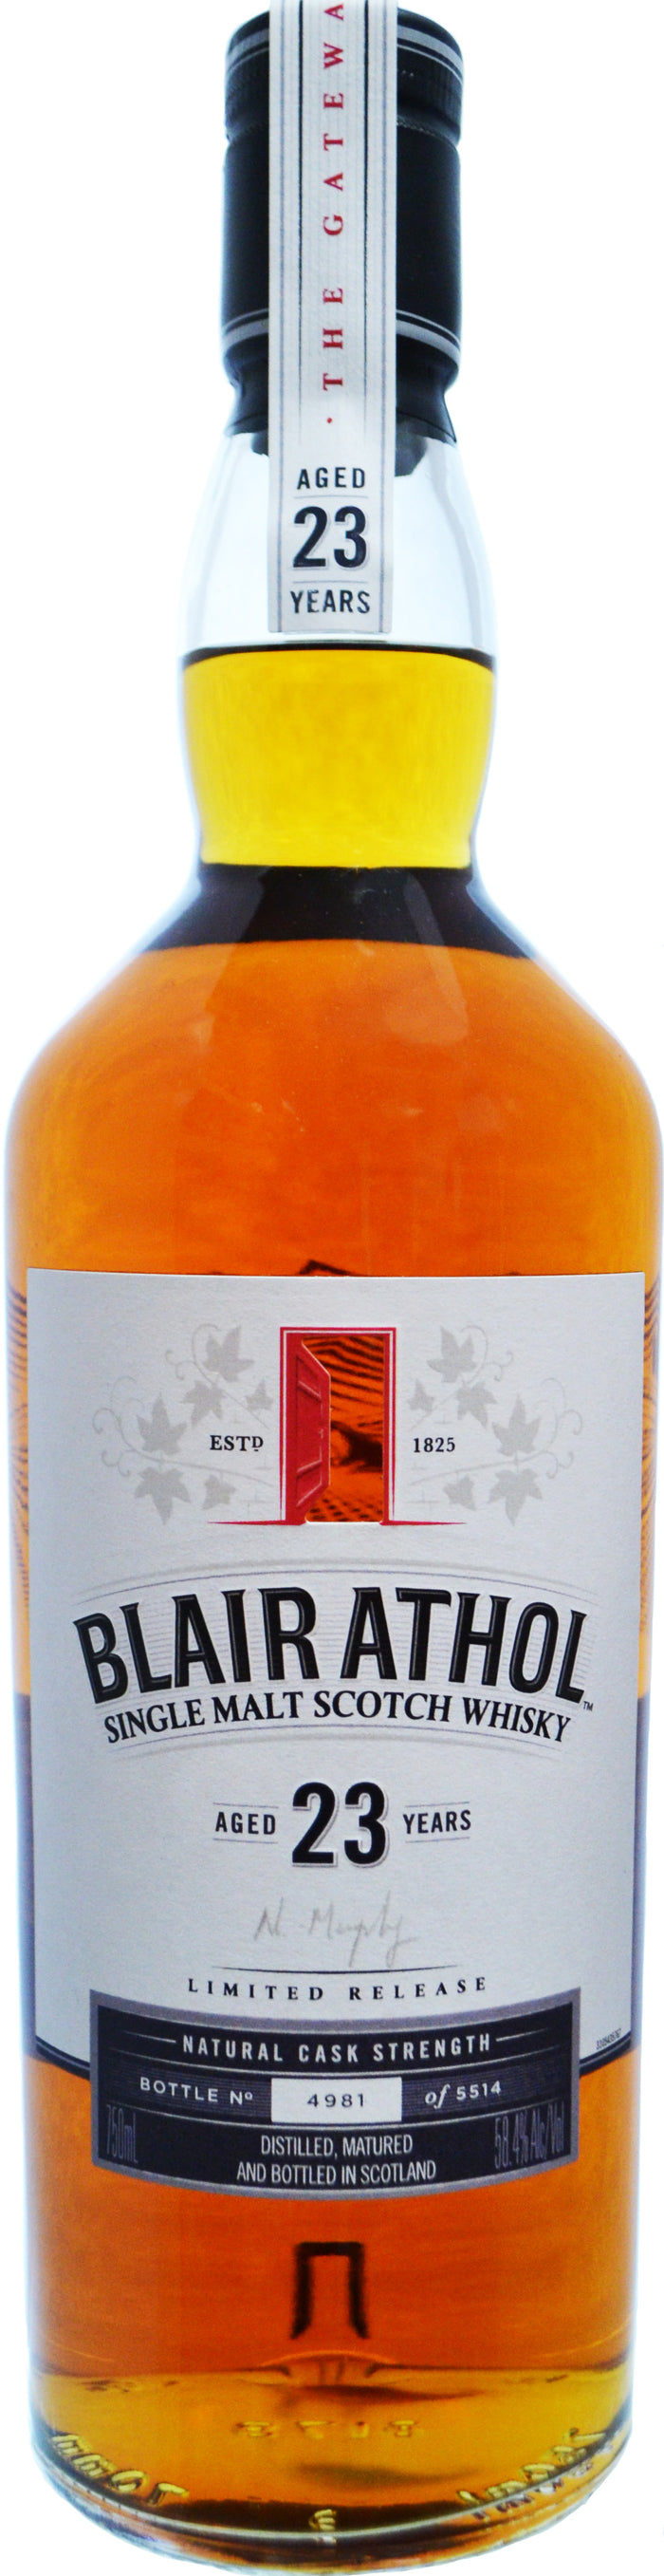 Blair Athol 1993 - 23 Year Old (Limited Release 2017) Natural Cask Strength Single Malt Scotch Whiskey